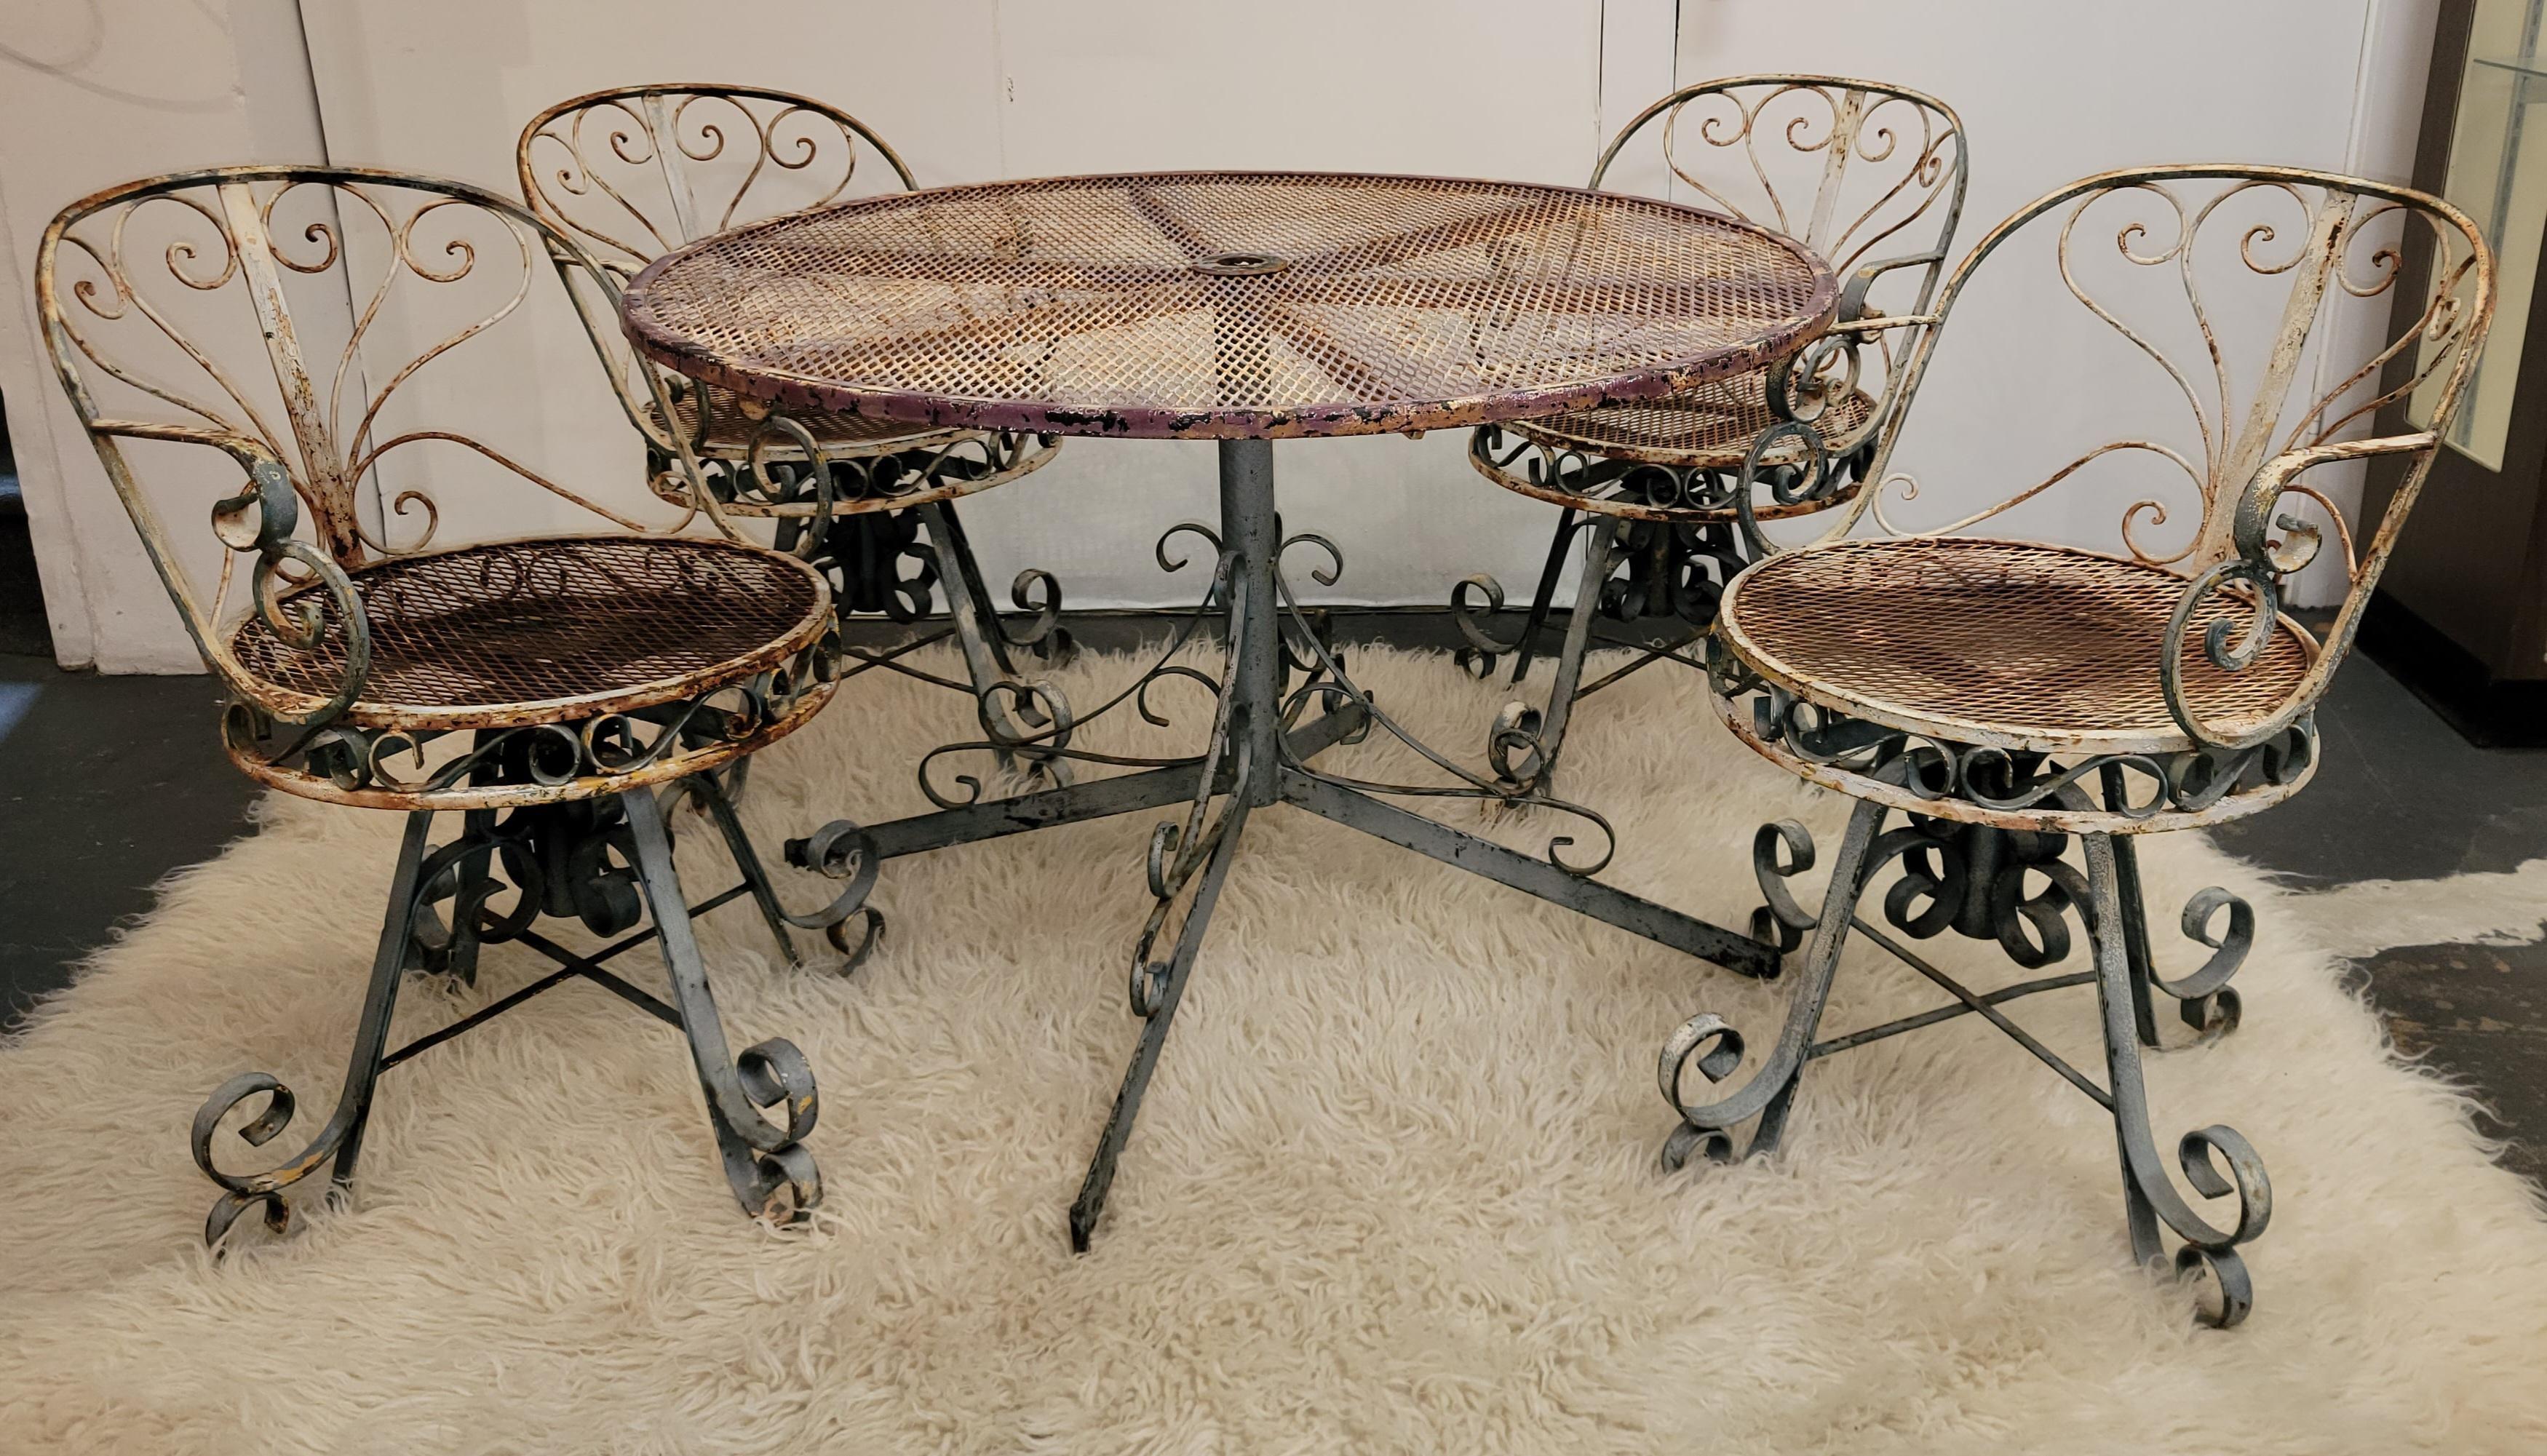 Five-piece outdoor garden set, four iron chairs and iron table. The chairs and tale have all original paint and amazing patina. The chairs swivel in place. One of the chairs does not swivel.

Table measures -42 inches diameter x 28.5 high
Chairs